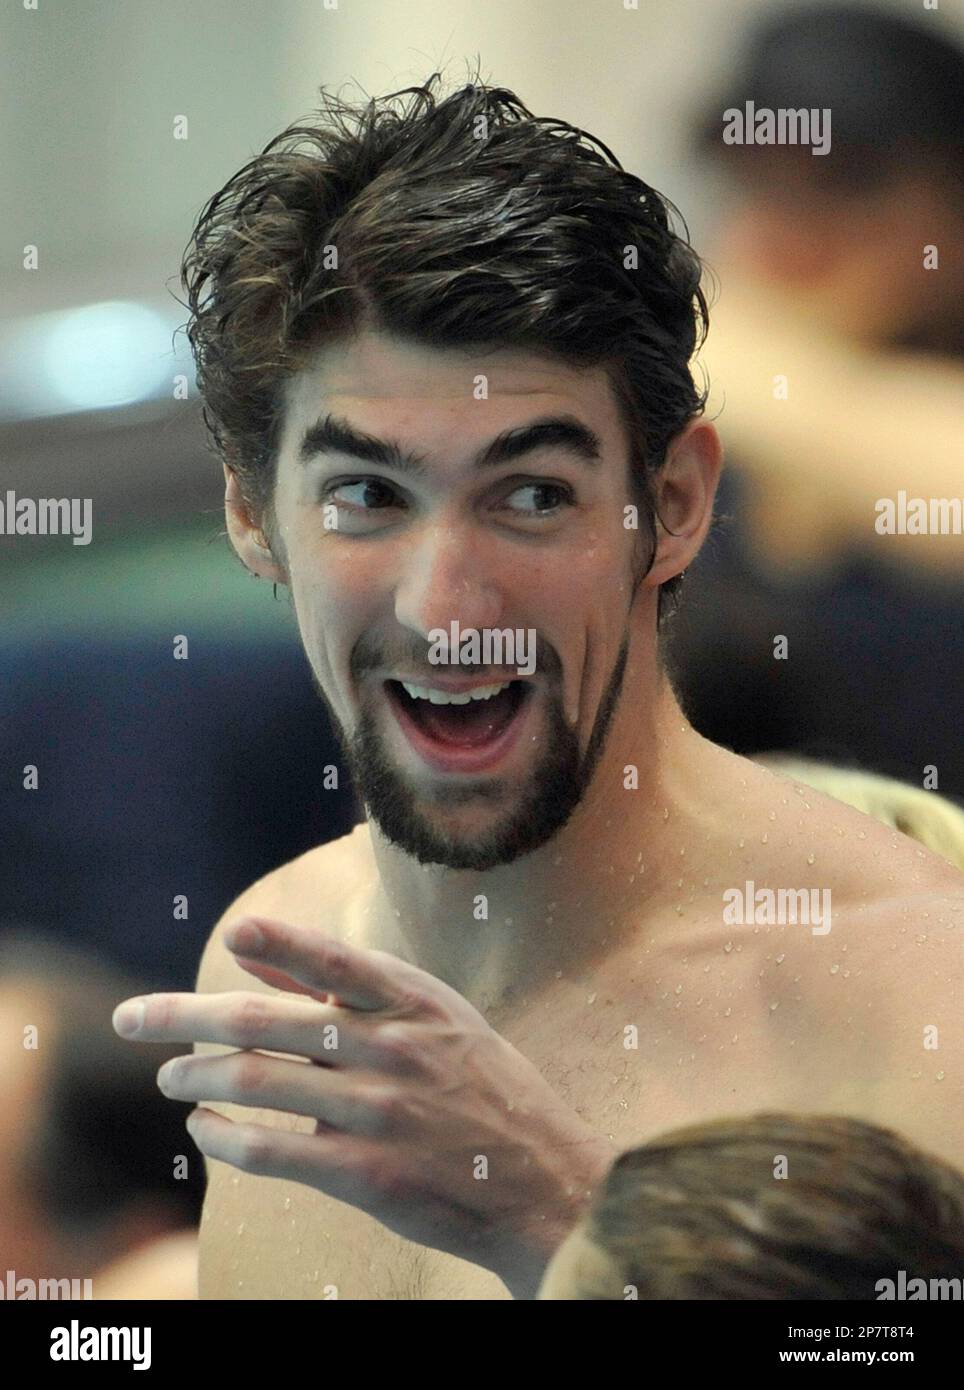 Us Swimmer Michael Phelps Gestures After His Men S 200 Meters Butterfly Heat At The Fina Short